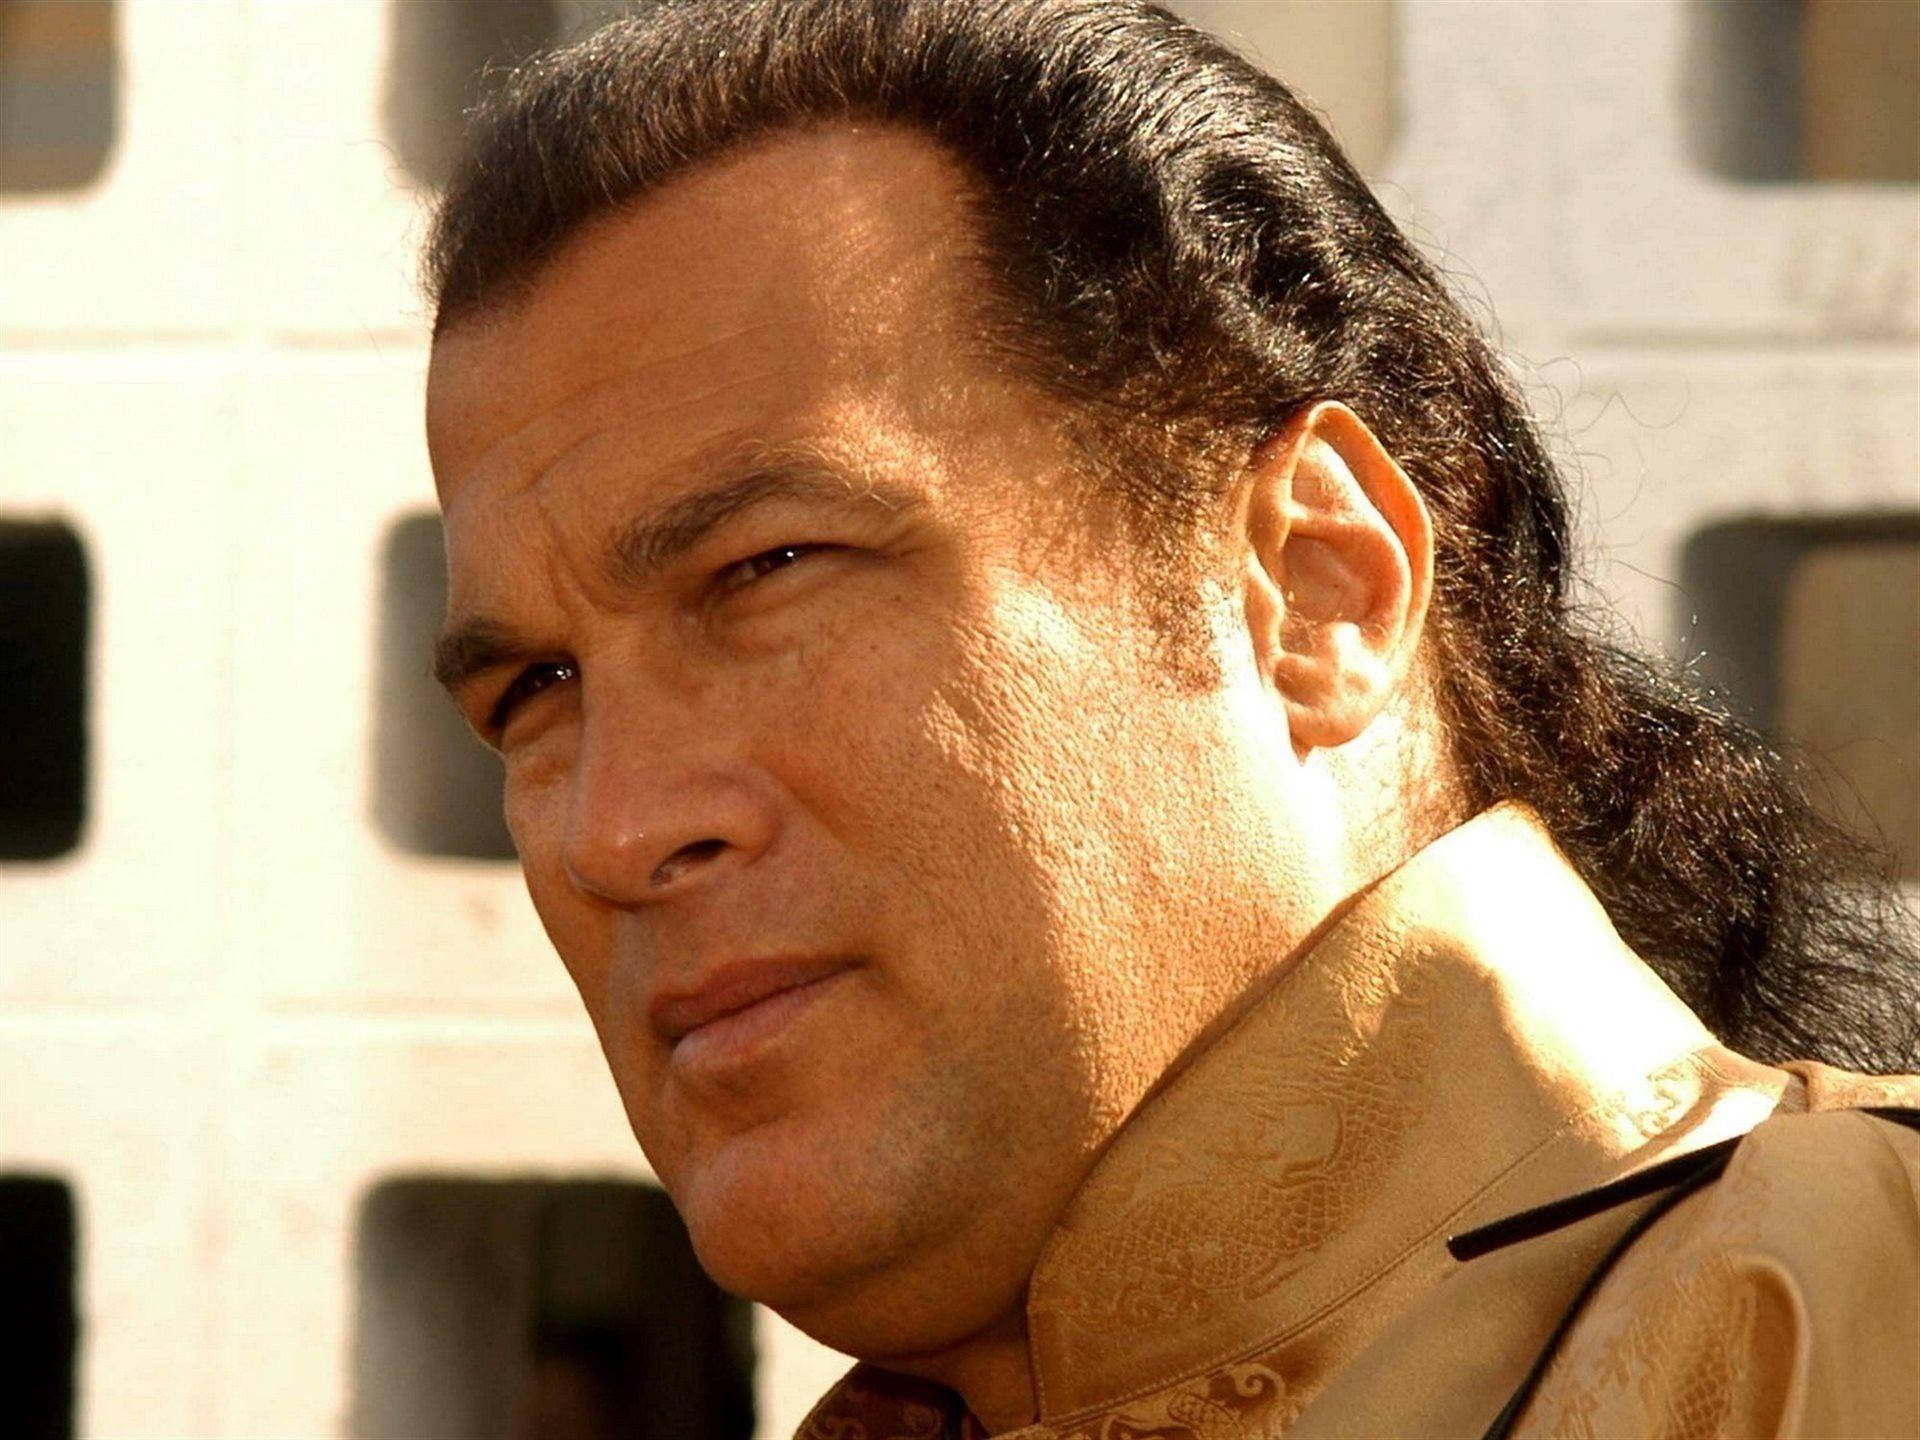 Hollywood Icon, Steven Seagal In Promotional Still